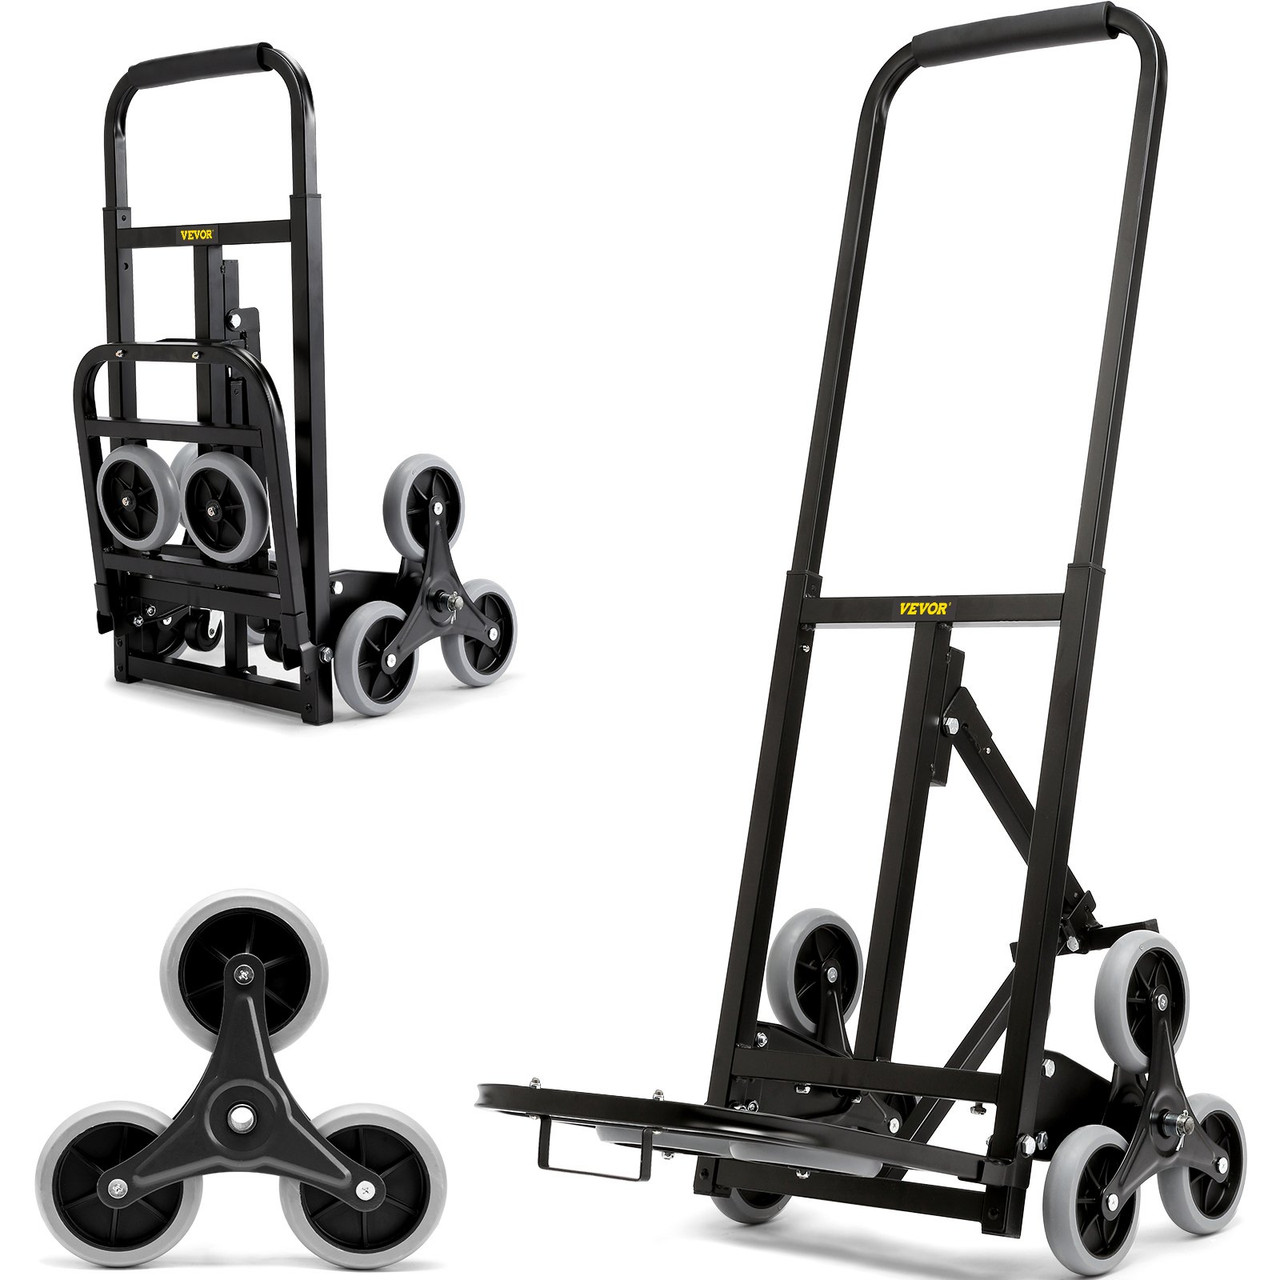 Stair Climbing Hand Truck, Heavy-Duty Hand Cart Dolly 375 lbs Load